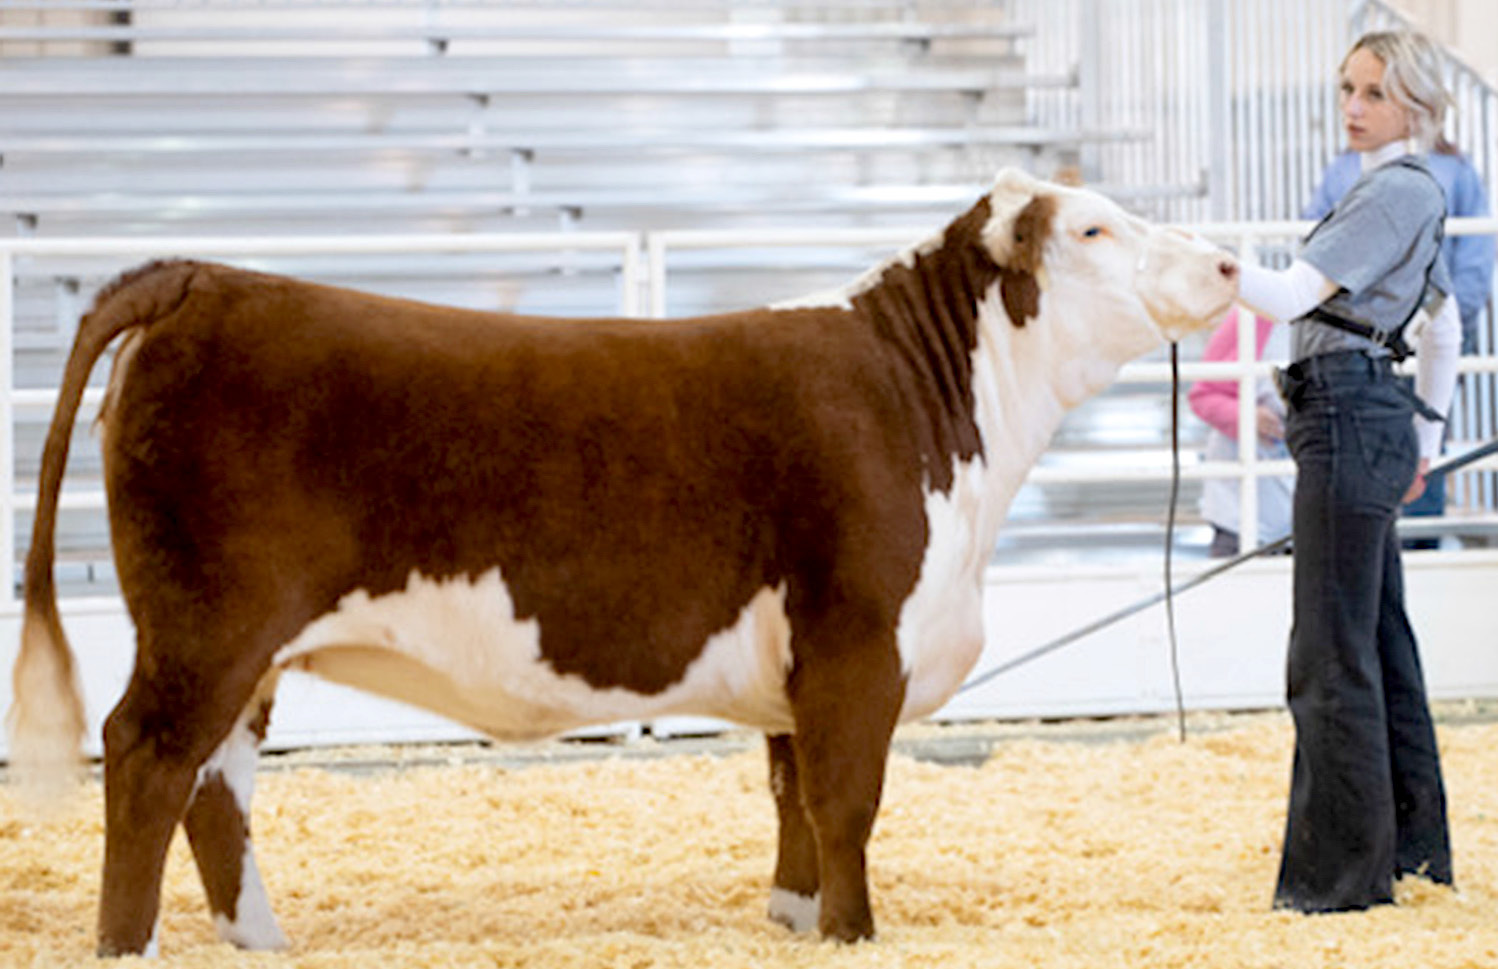 CADY PIEPER shows her heifer in the finals of Senior Beef Showmanship at the KJLS held in Hutchinson September 30 to October 1.